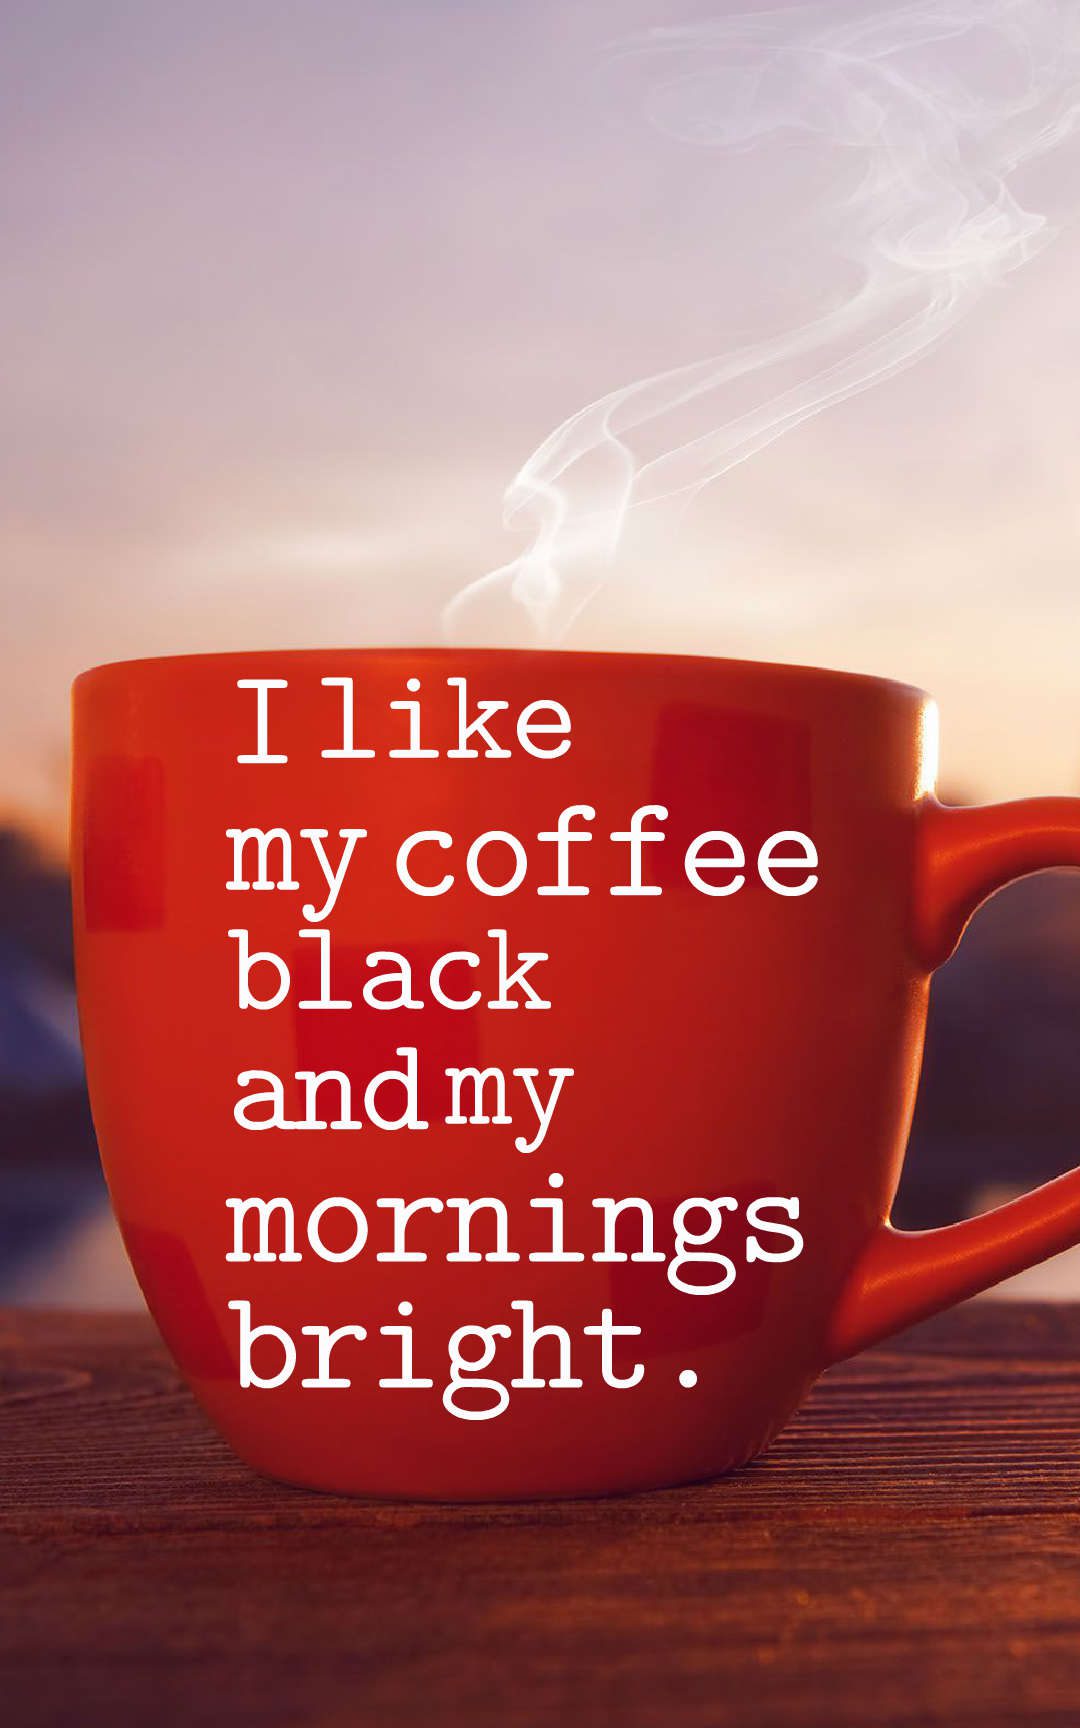 I like my coffee black and my mornings bright.